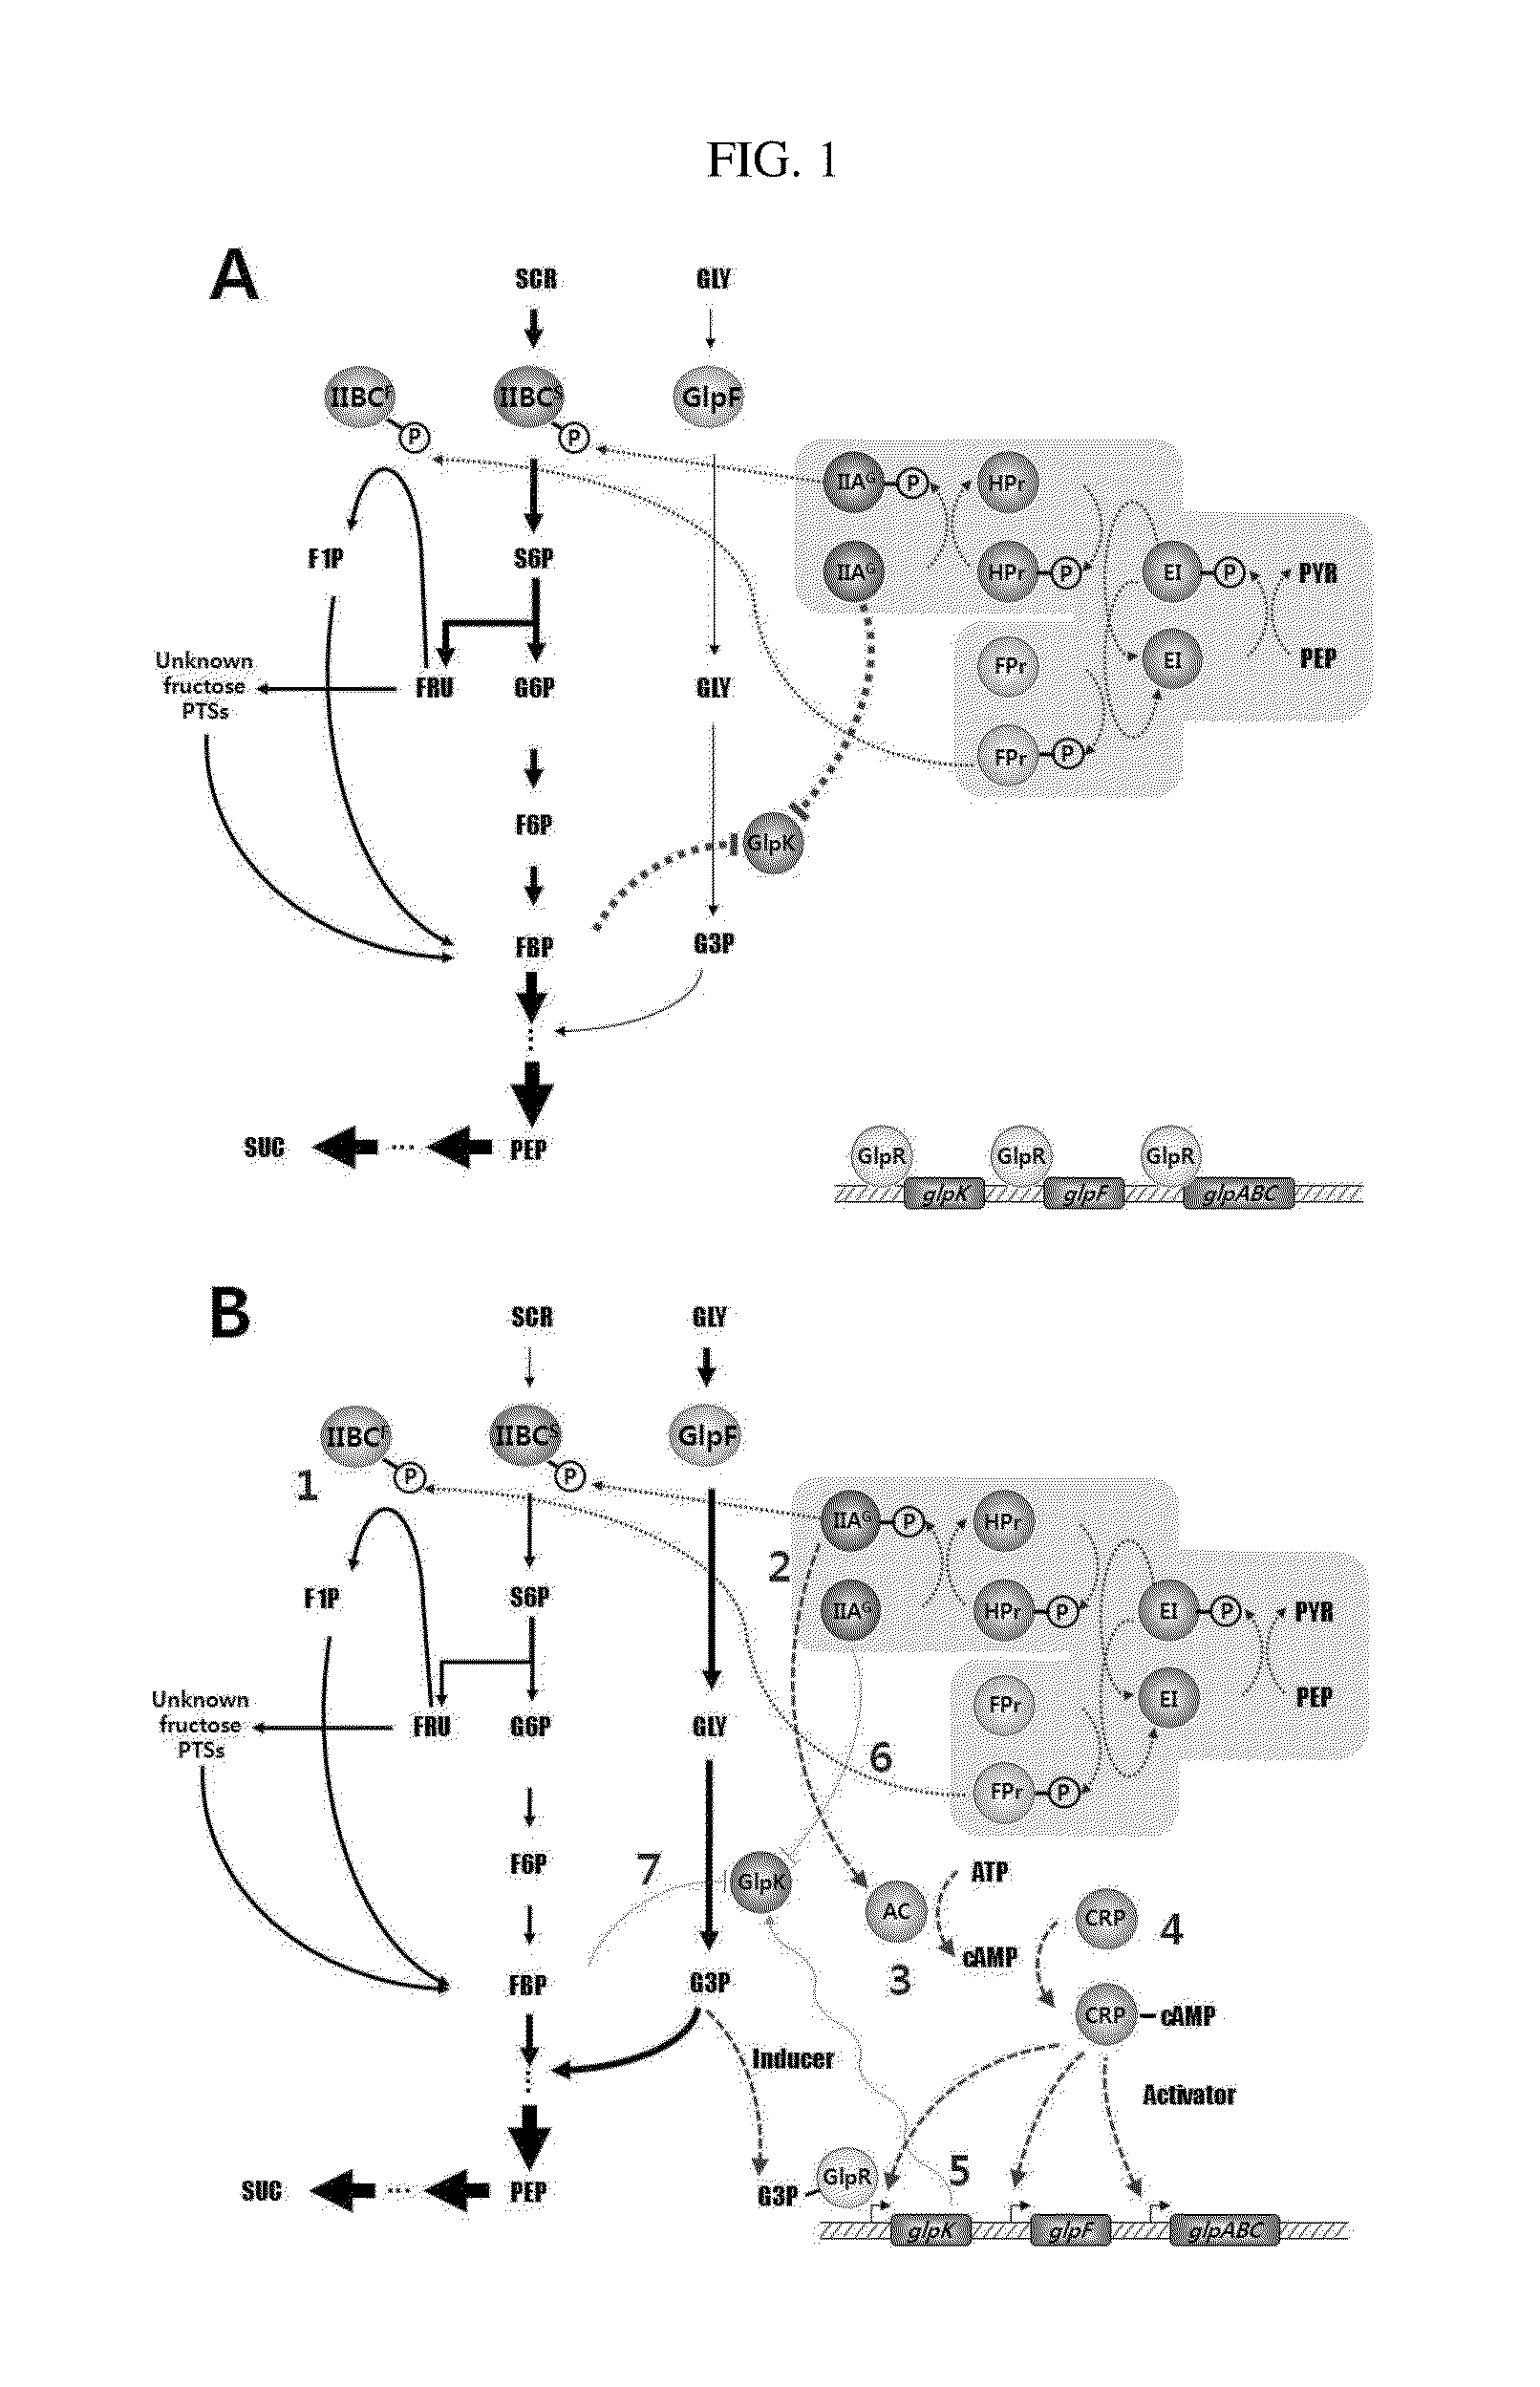 Novel mutant microorganism producing succinic acid simultaneously using sucrose and glycerol, and method for preparing succinic acid using same